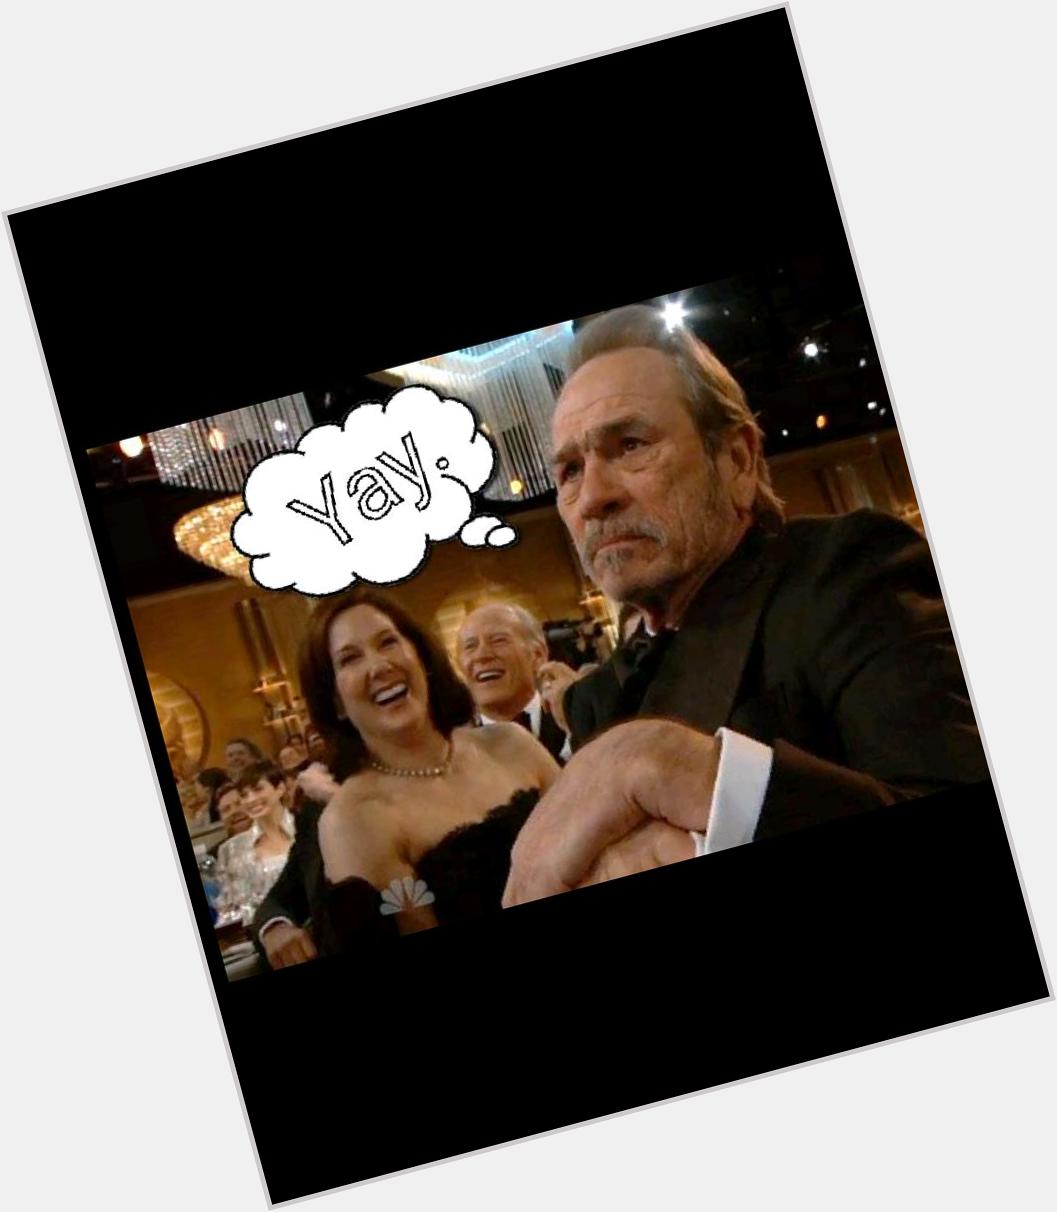 69 years young today!! Happy birthday, Tommy Lee Jones!!  